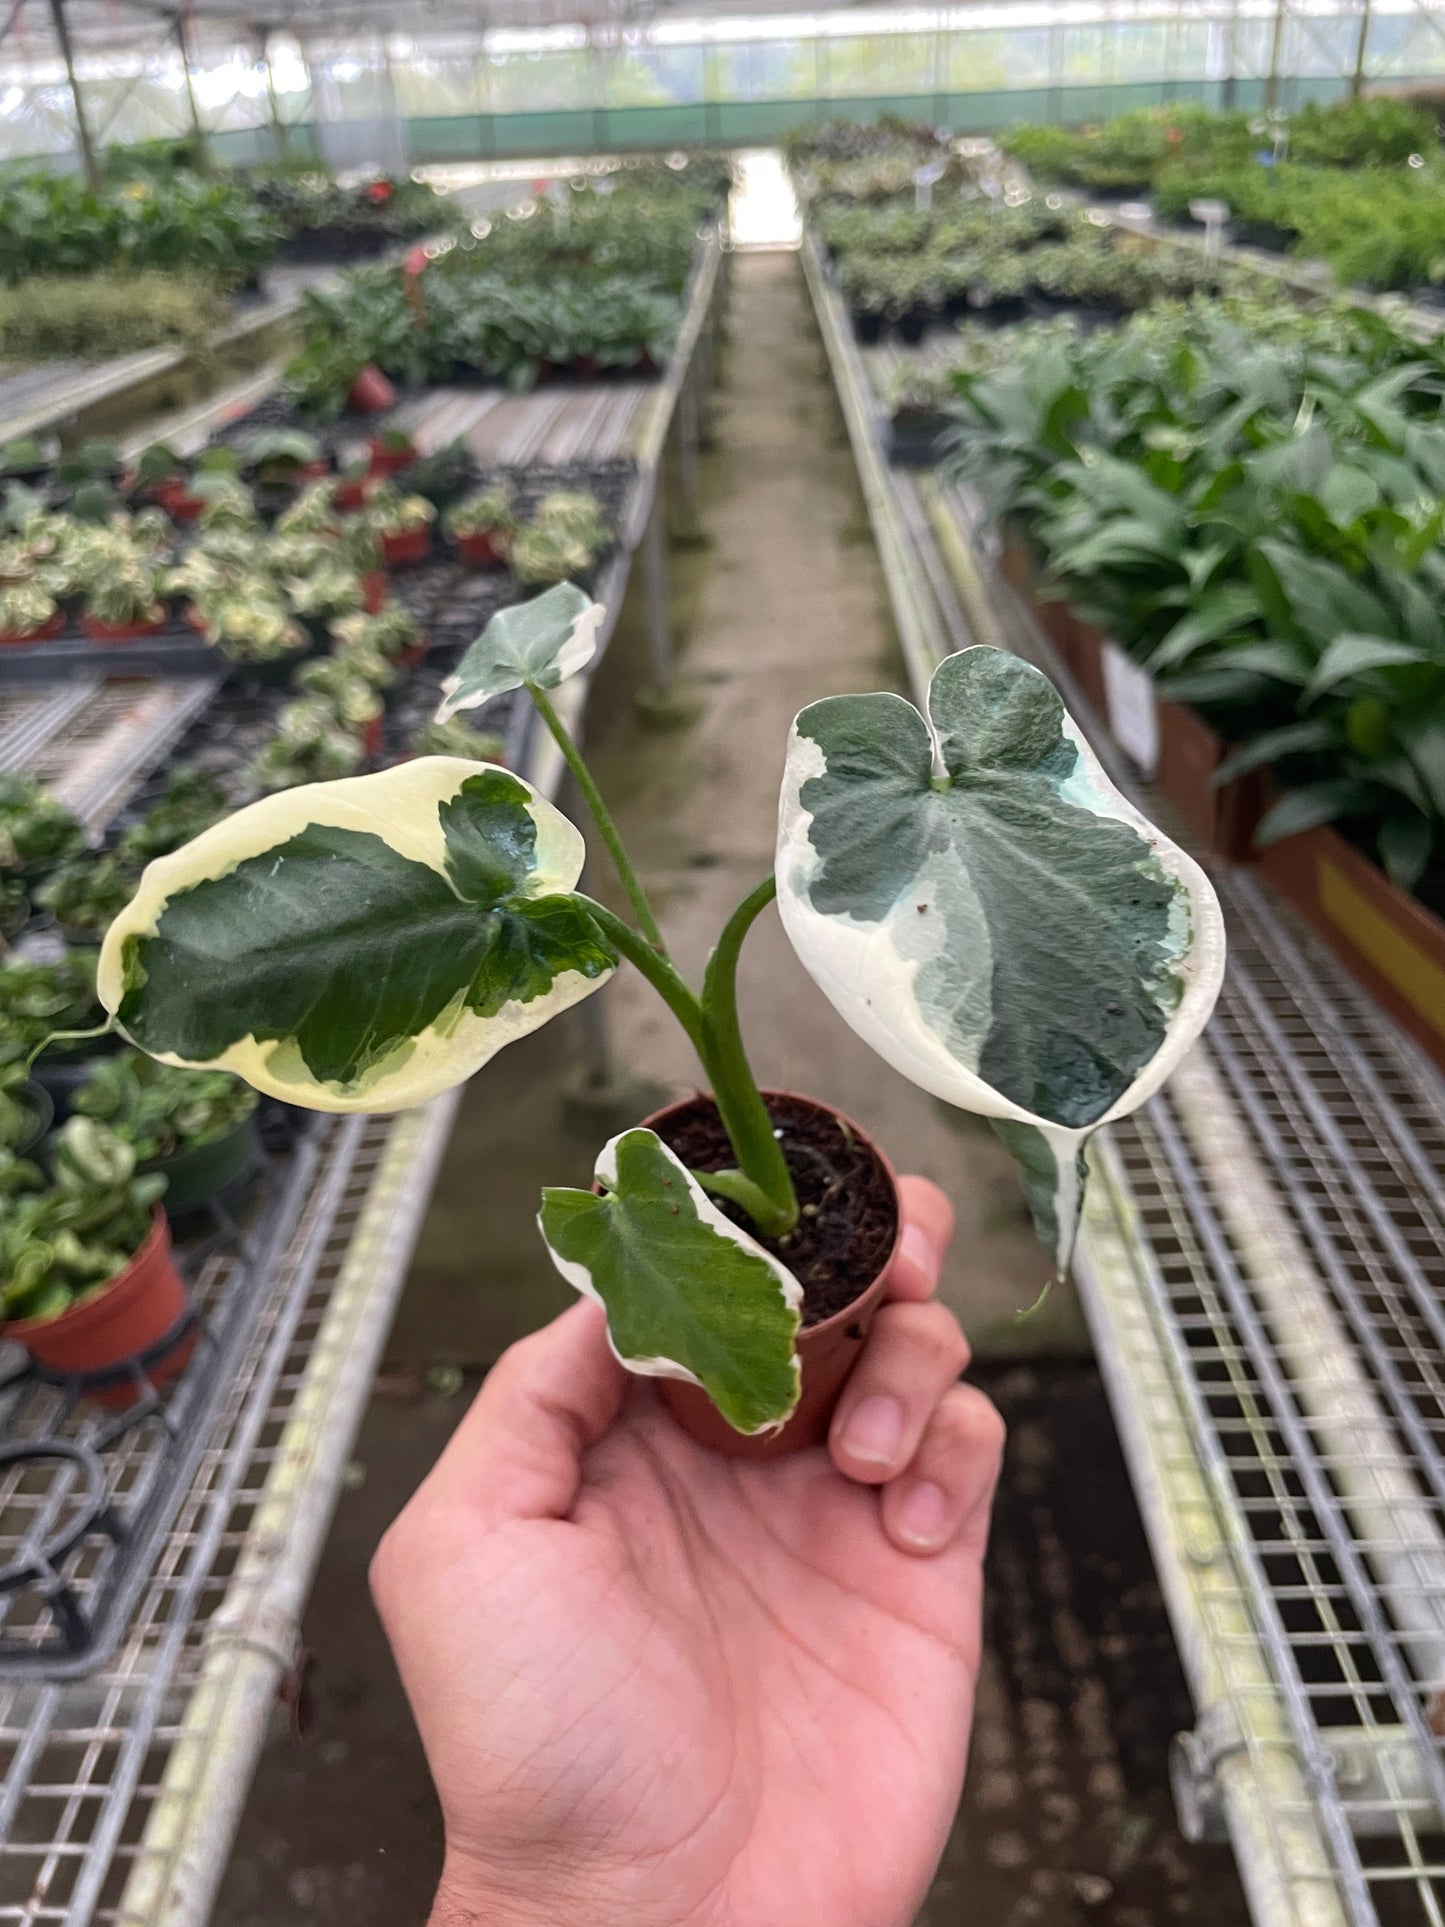 Alocasia 'Mickey Mouse' (Xanthosoma Sagittifolium 'Variegatum Monstrosum')- Large Mickey Mouse Shaped Leaves With Cream Yellow Variegation- (4 Inch or 6 Inch Nursery Pot)